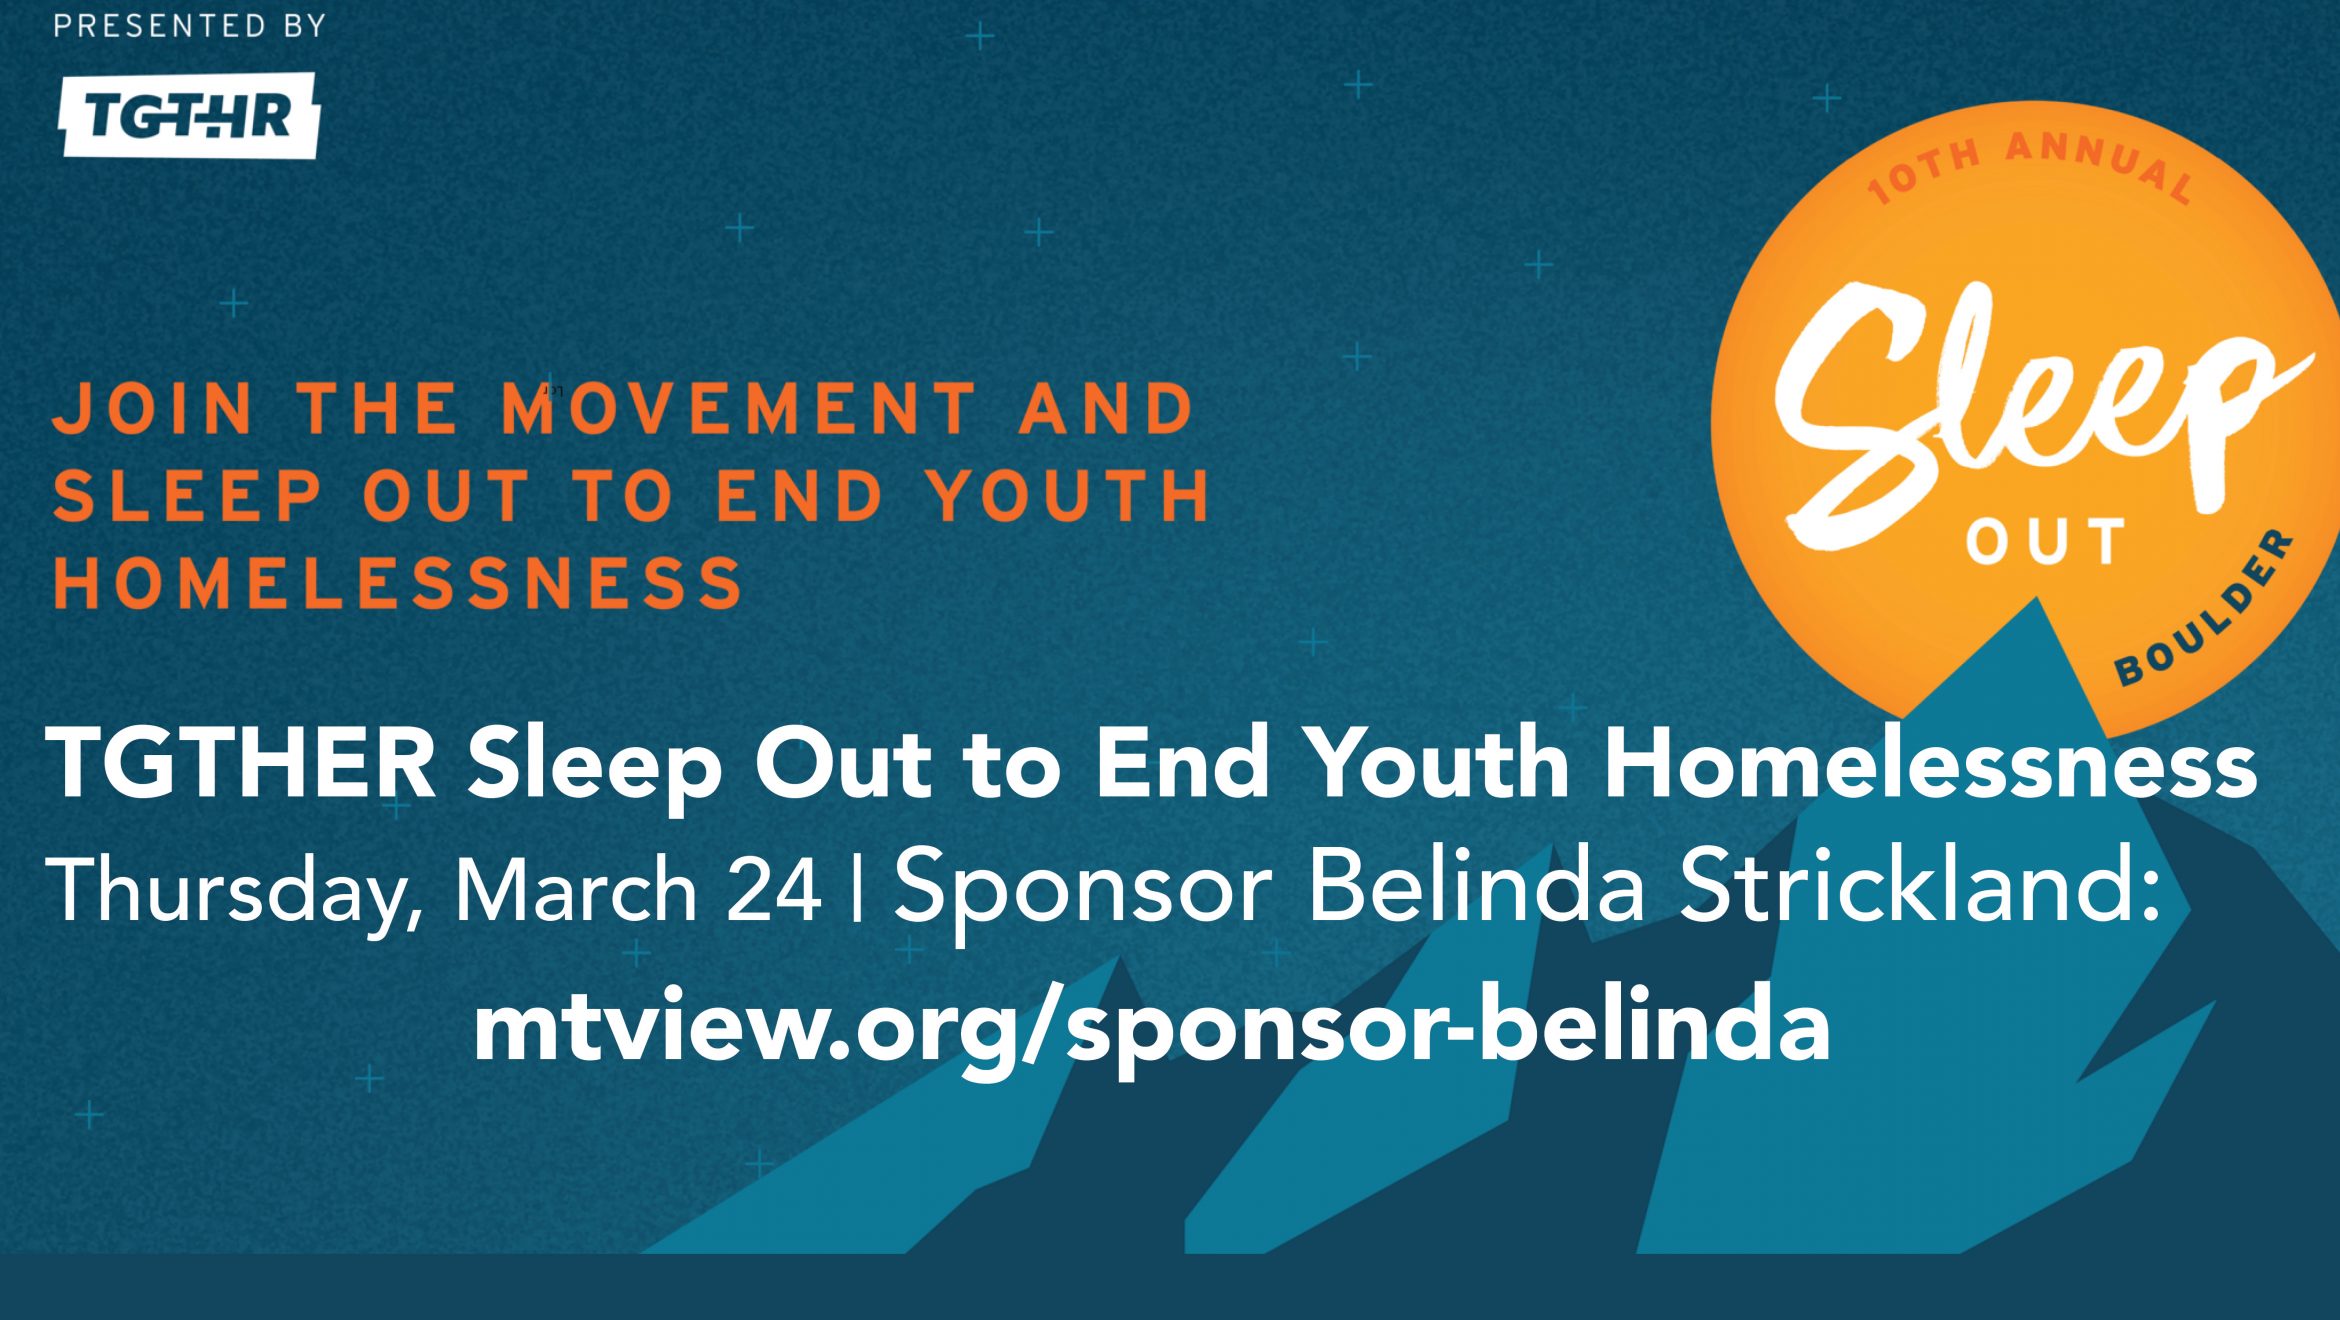 Sponsor Belinda in the TGTHR Sleep Out to End Youth Homelessness